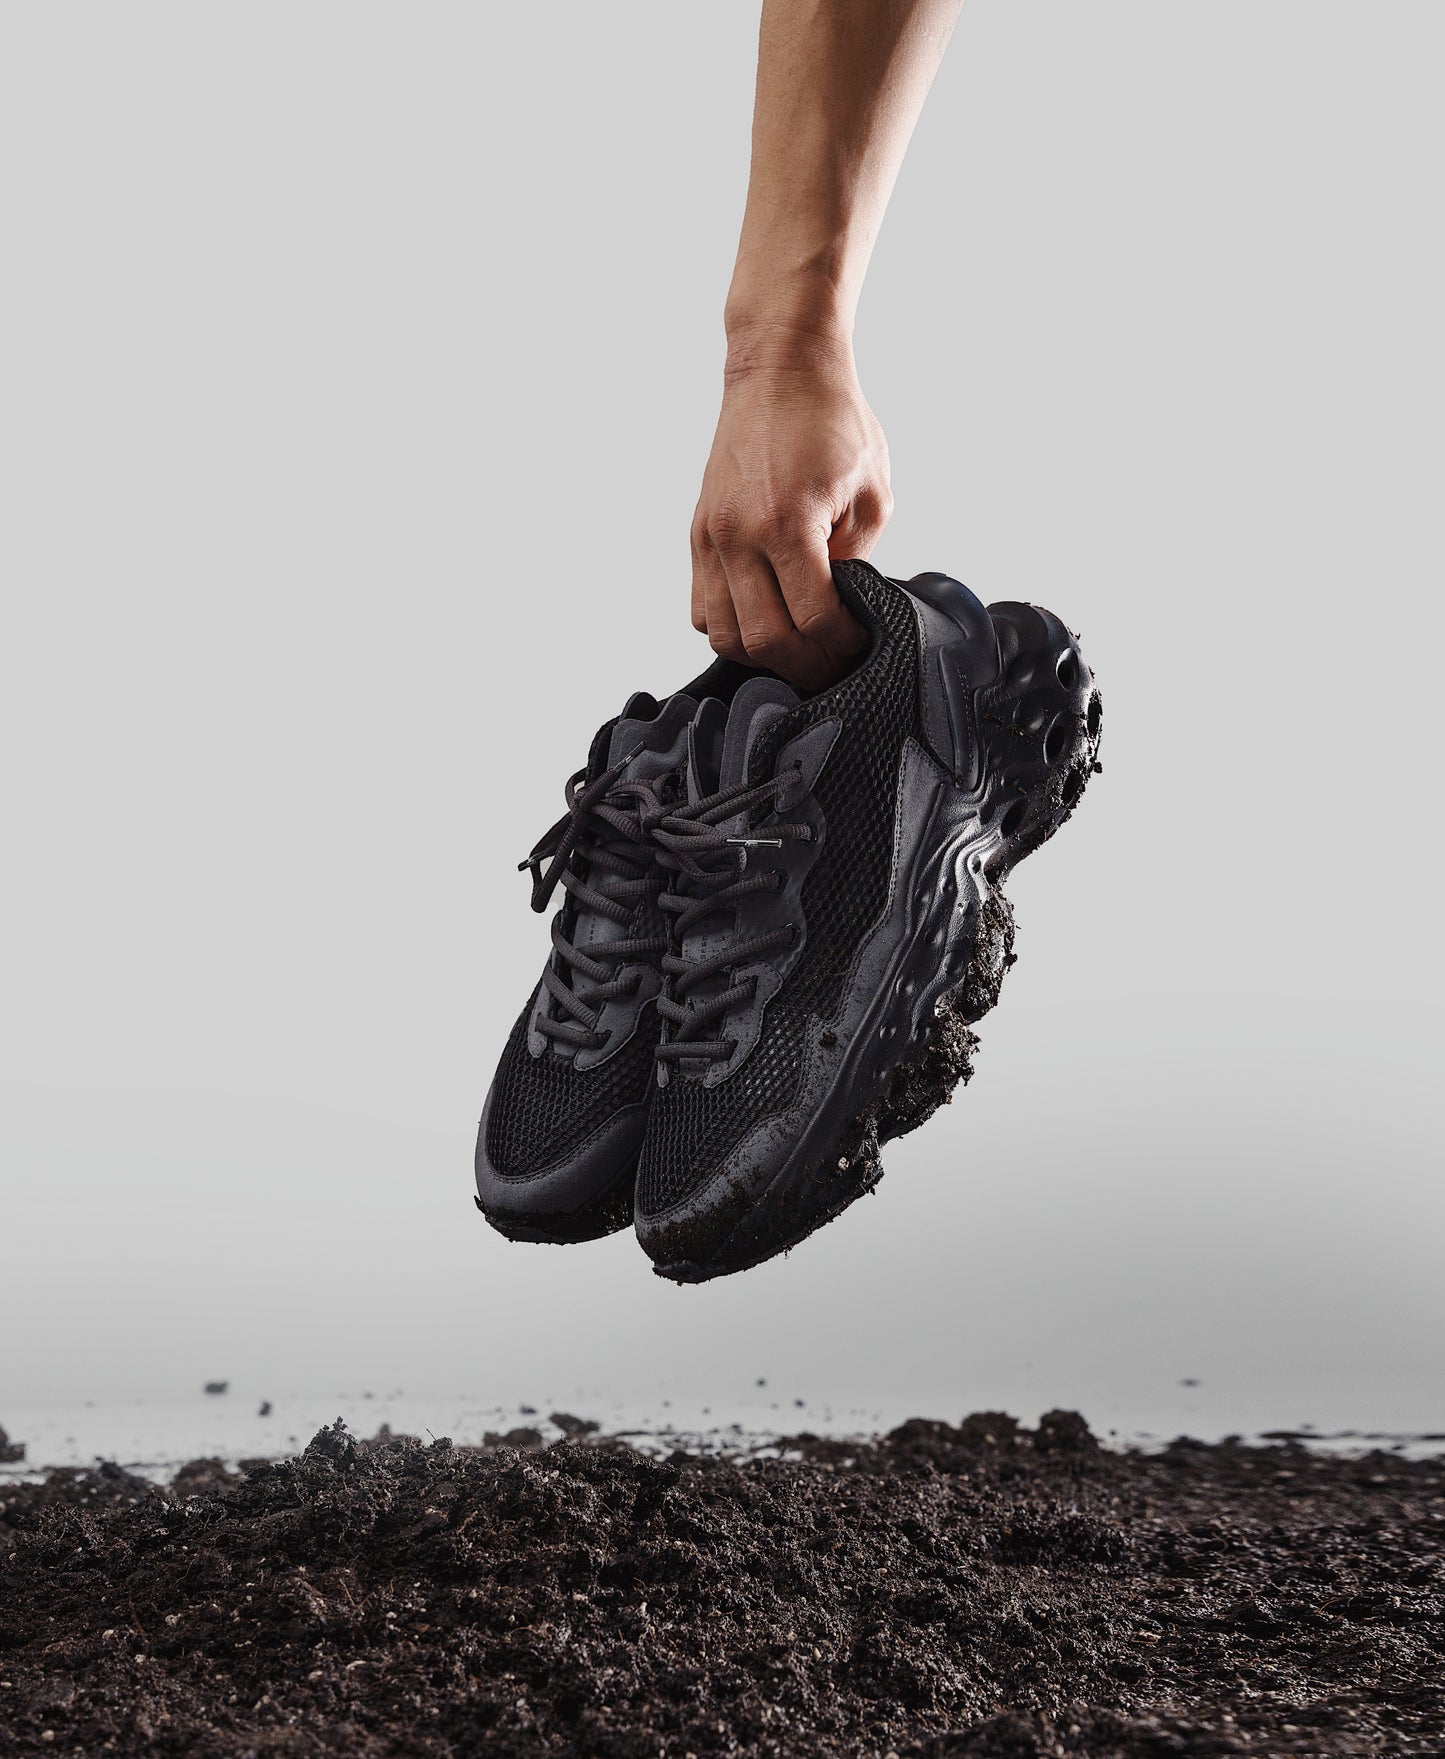 Flowers for Society Sneaker Seed.One Black Mud black sideview held by a hand above a pile of earth